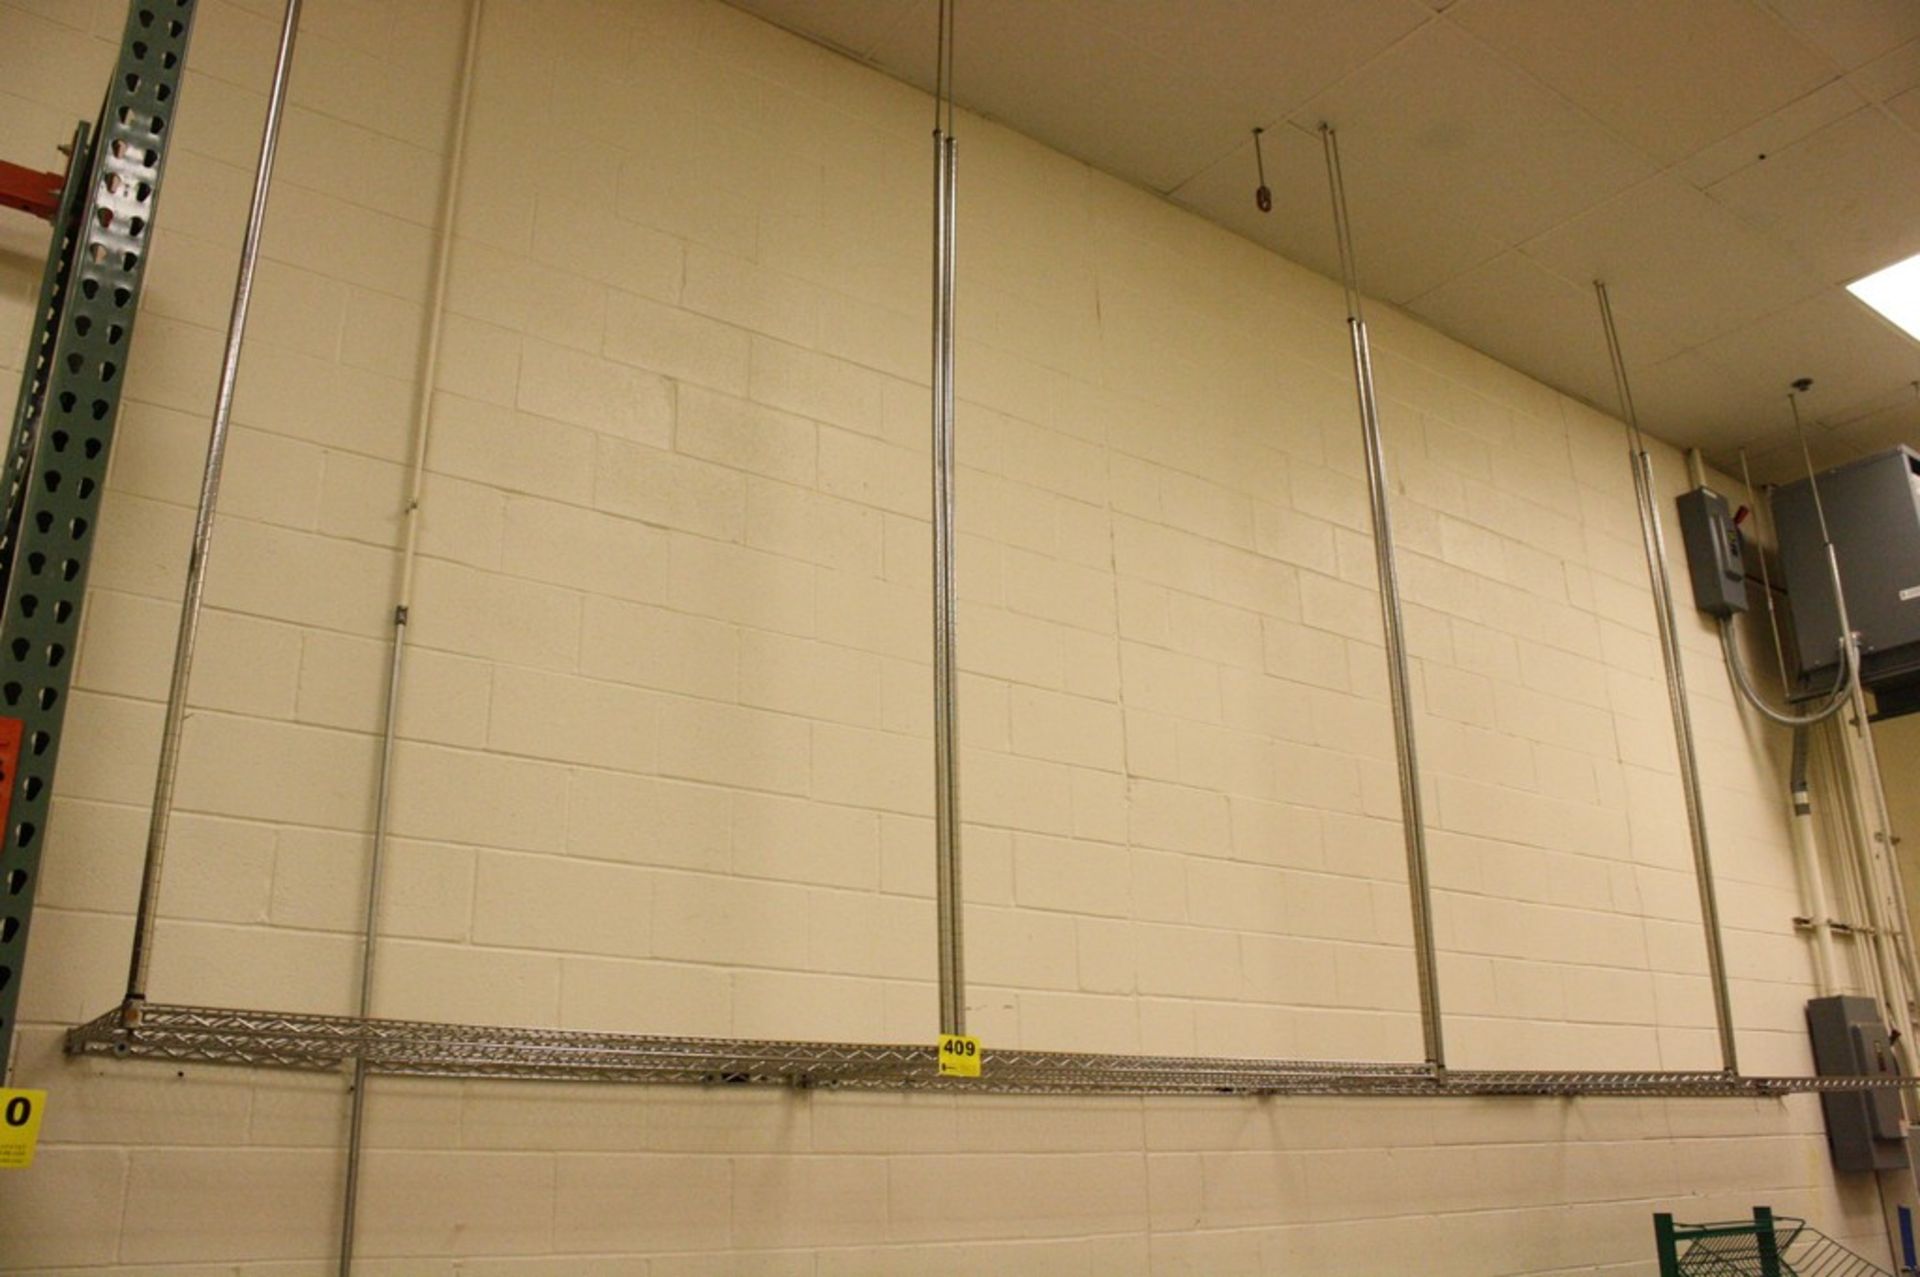 SECTIONS OF EAGLE HANGING WIRE RACKING-60" X 24"